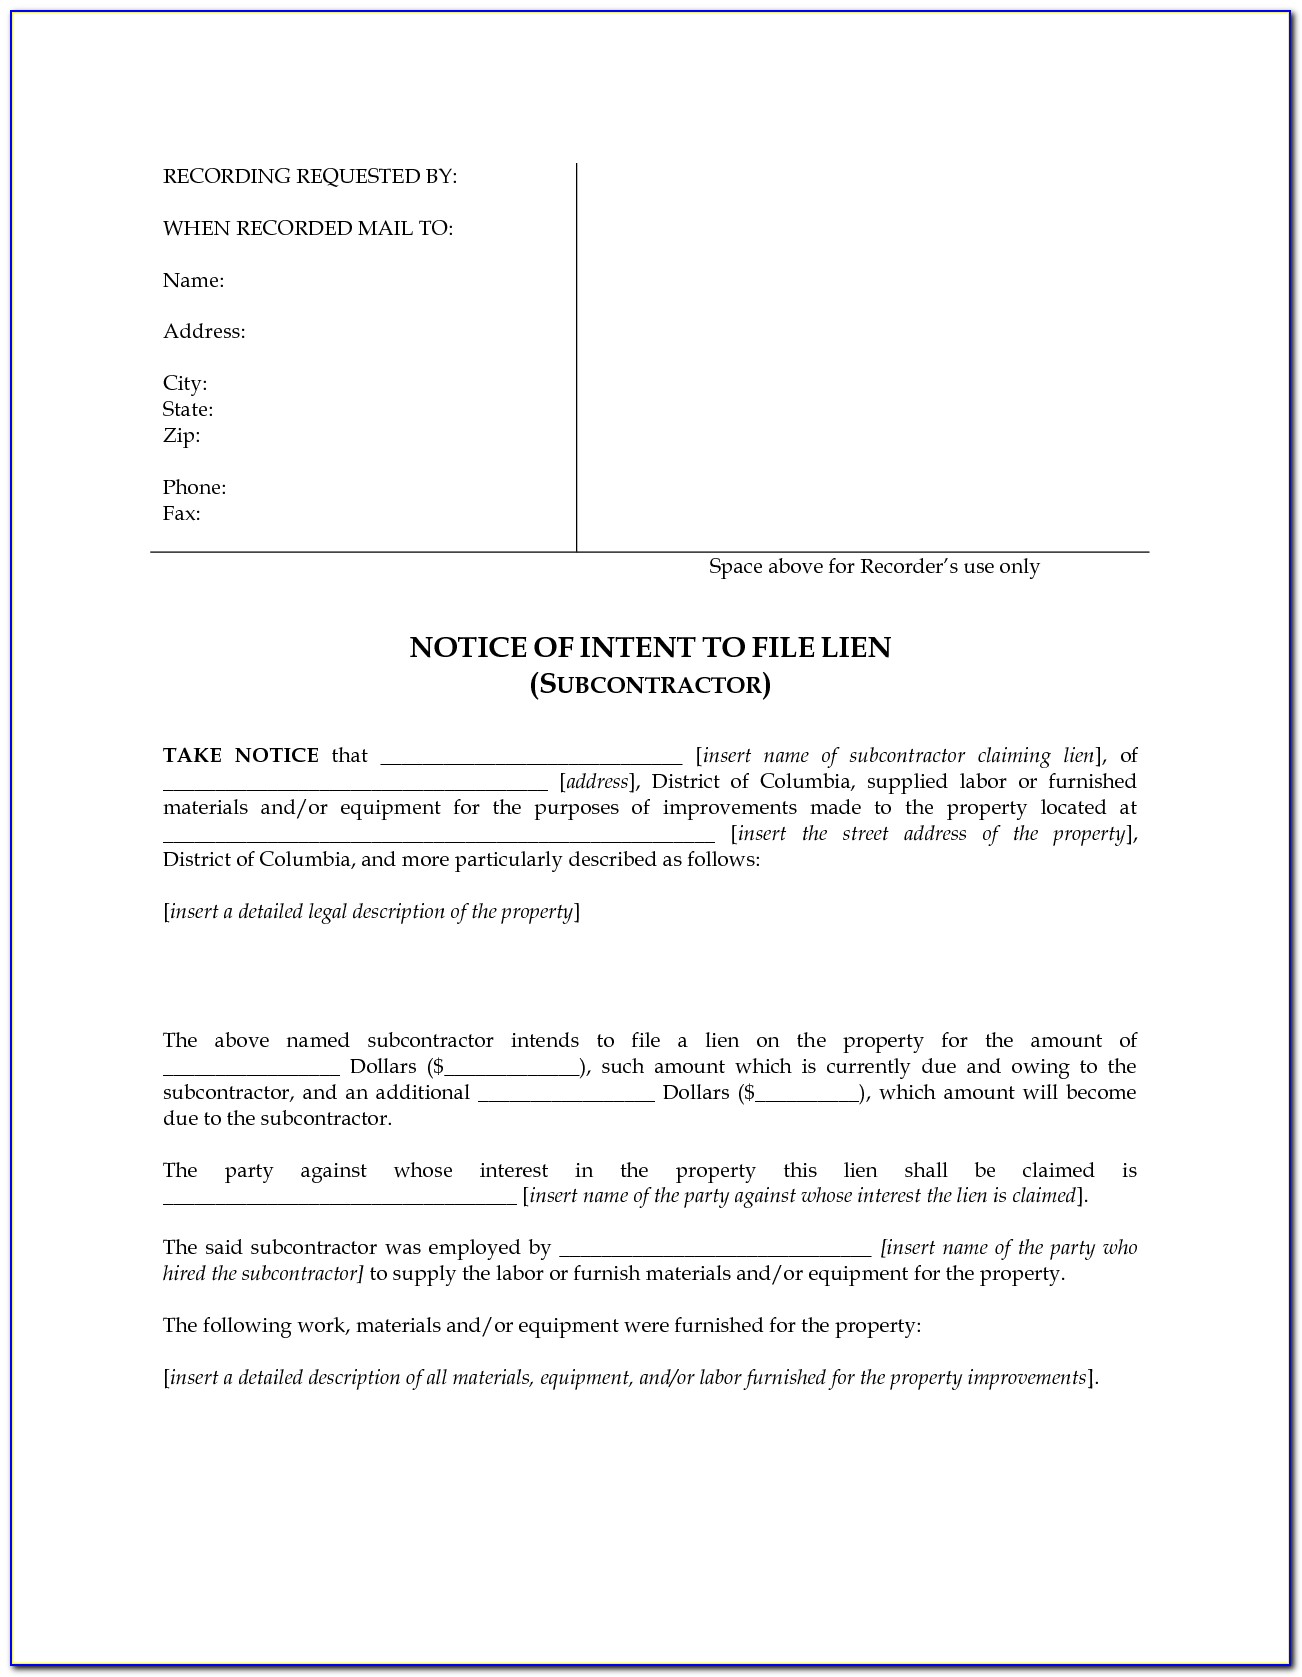 notice-of-intent-to-file-lien-colorado-form-form-resume-examples-q25zvwj50o